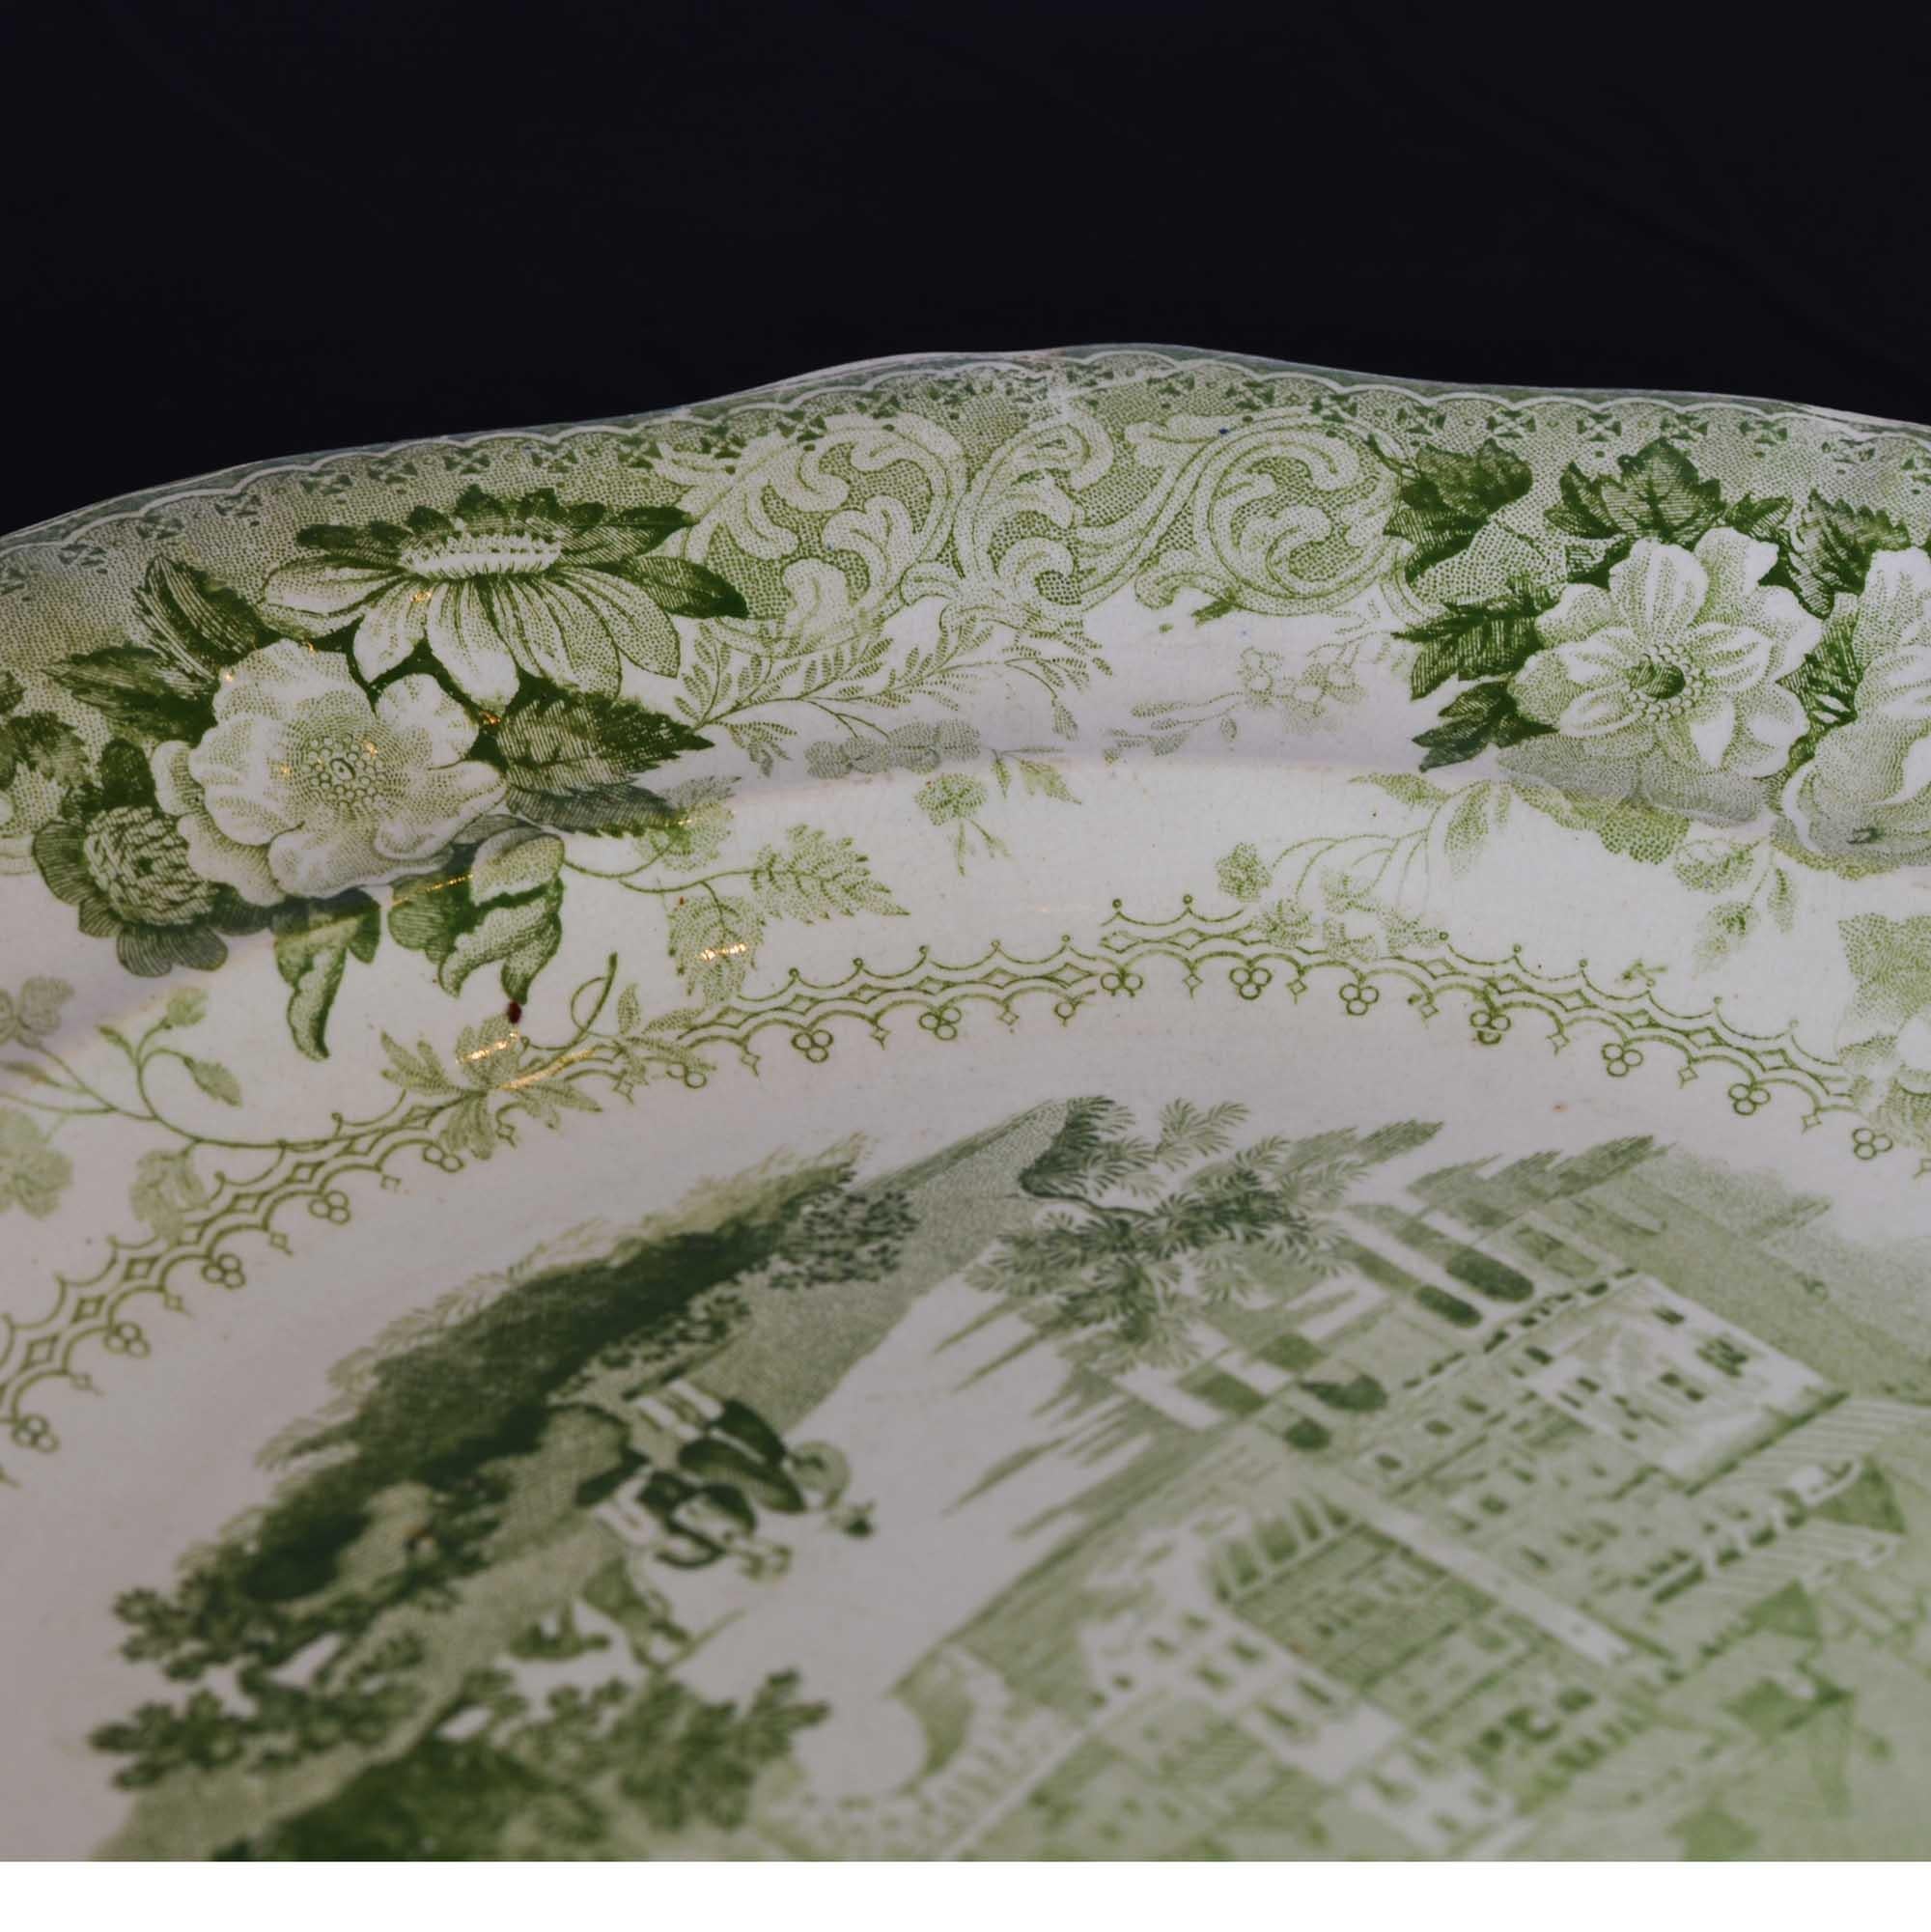 Antique Green Transferware Dinner Plates Sicilian and Verona Patterns For Sale 6